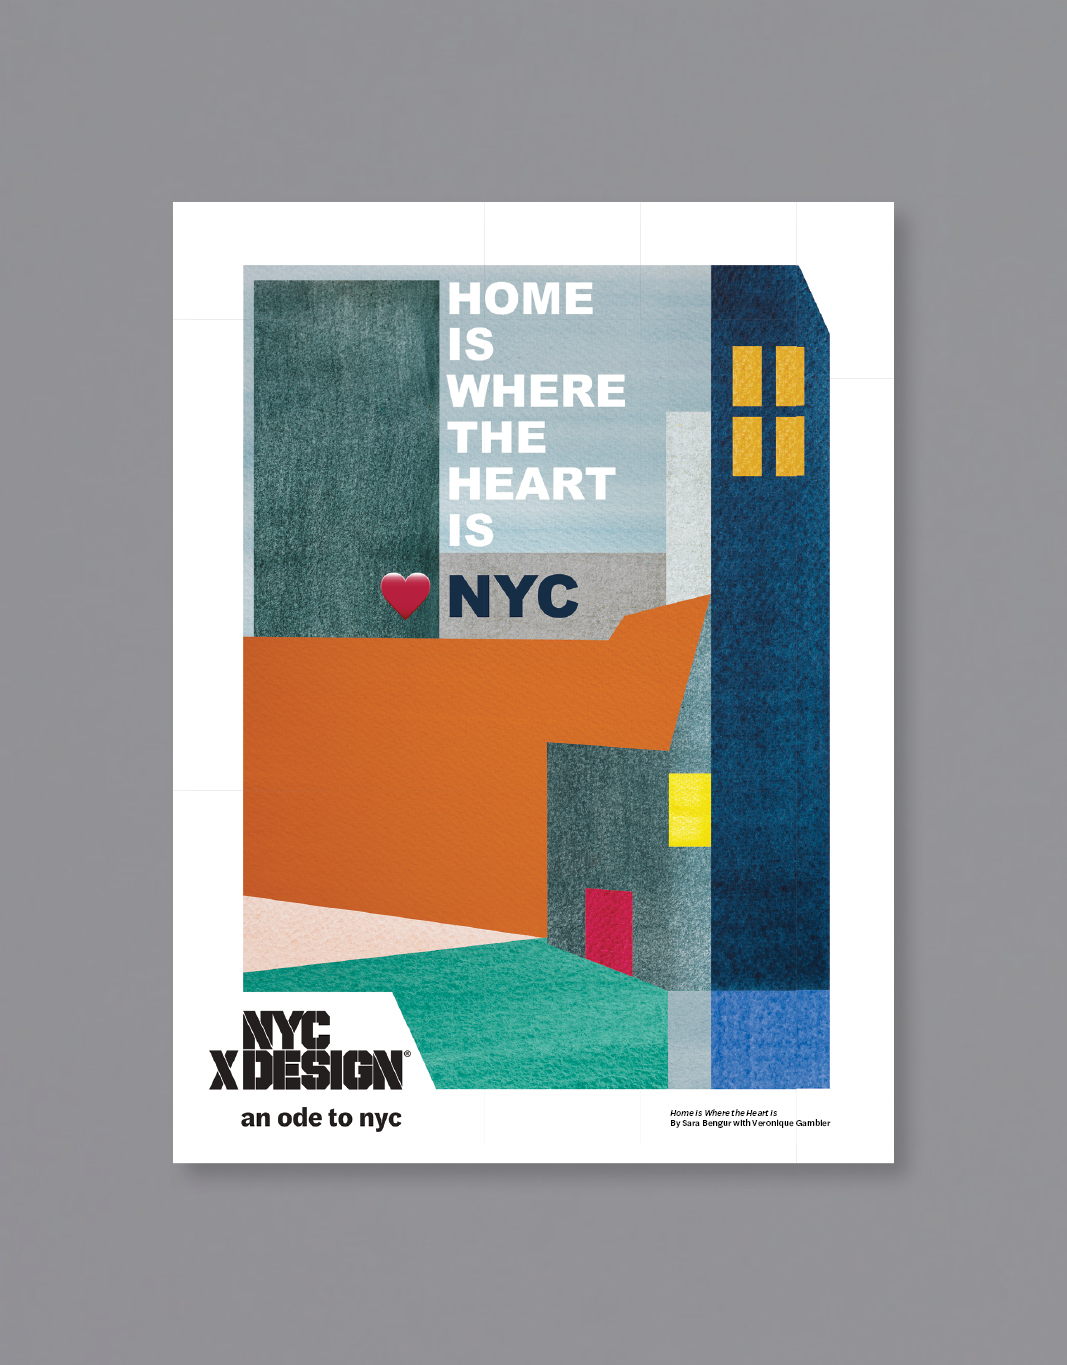 A poster showing The night of NYC in geometric shapes. The text is saying 